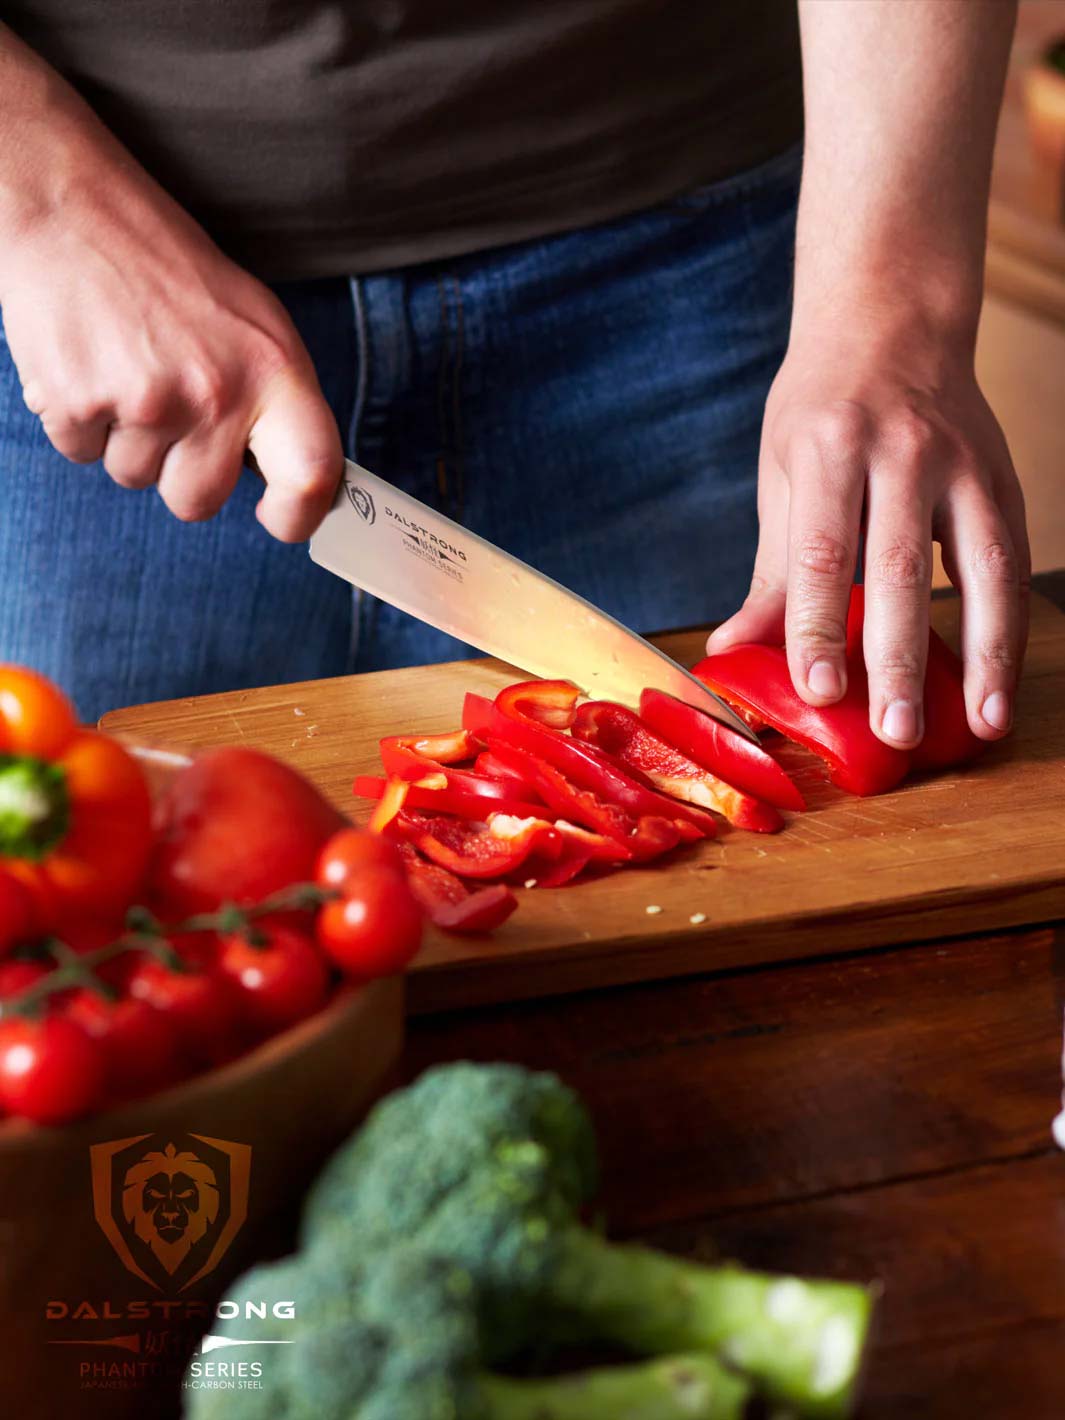 Dalstrong phantom series 8 inch chef knife with pakka wood handle and sliced red bell peppers on a cutting board.